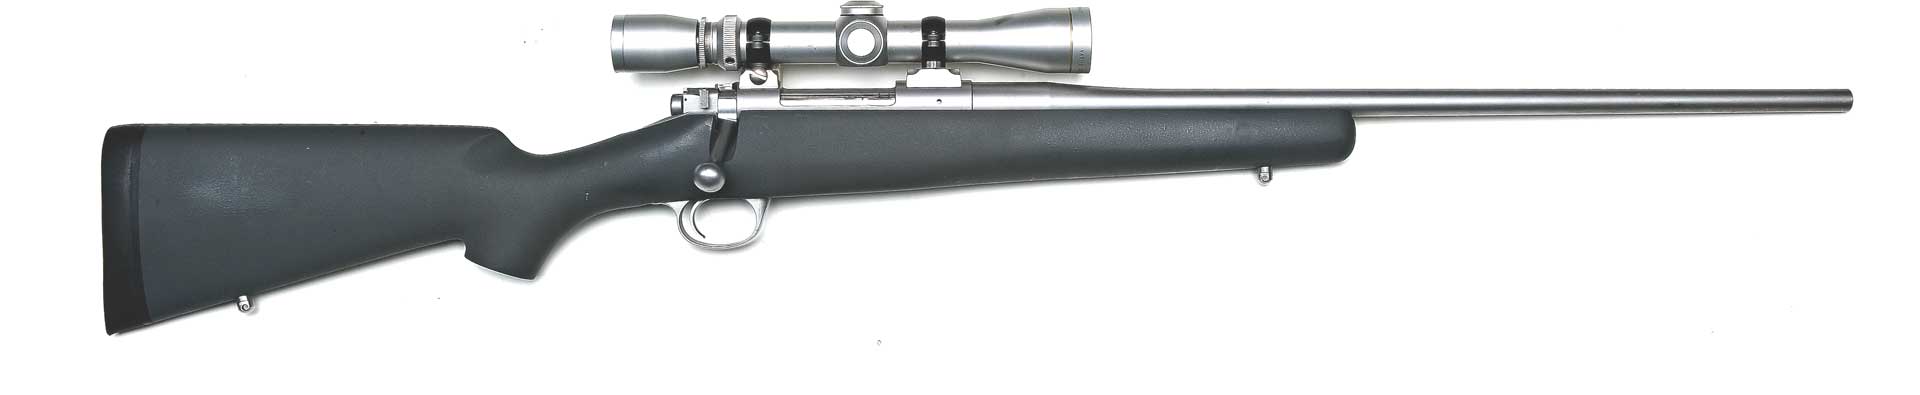 right-side view on white of Kimber 84M Montana stainless steel bolt-action rifle black stock